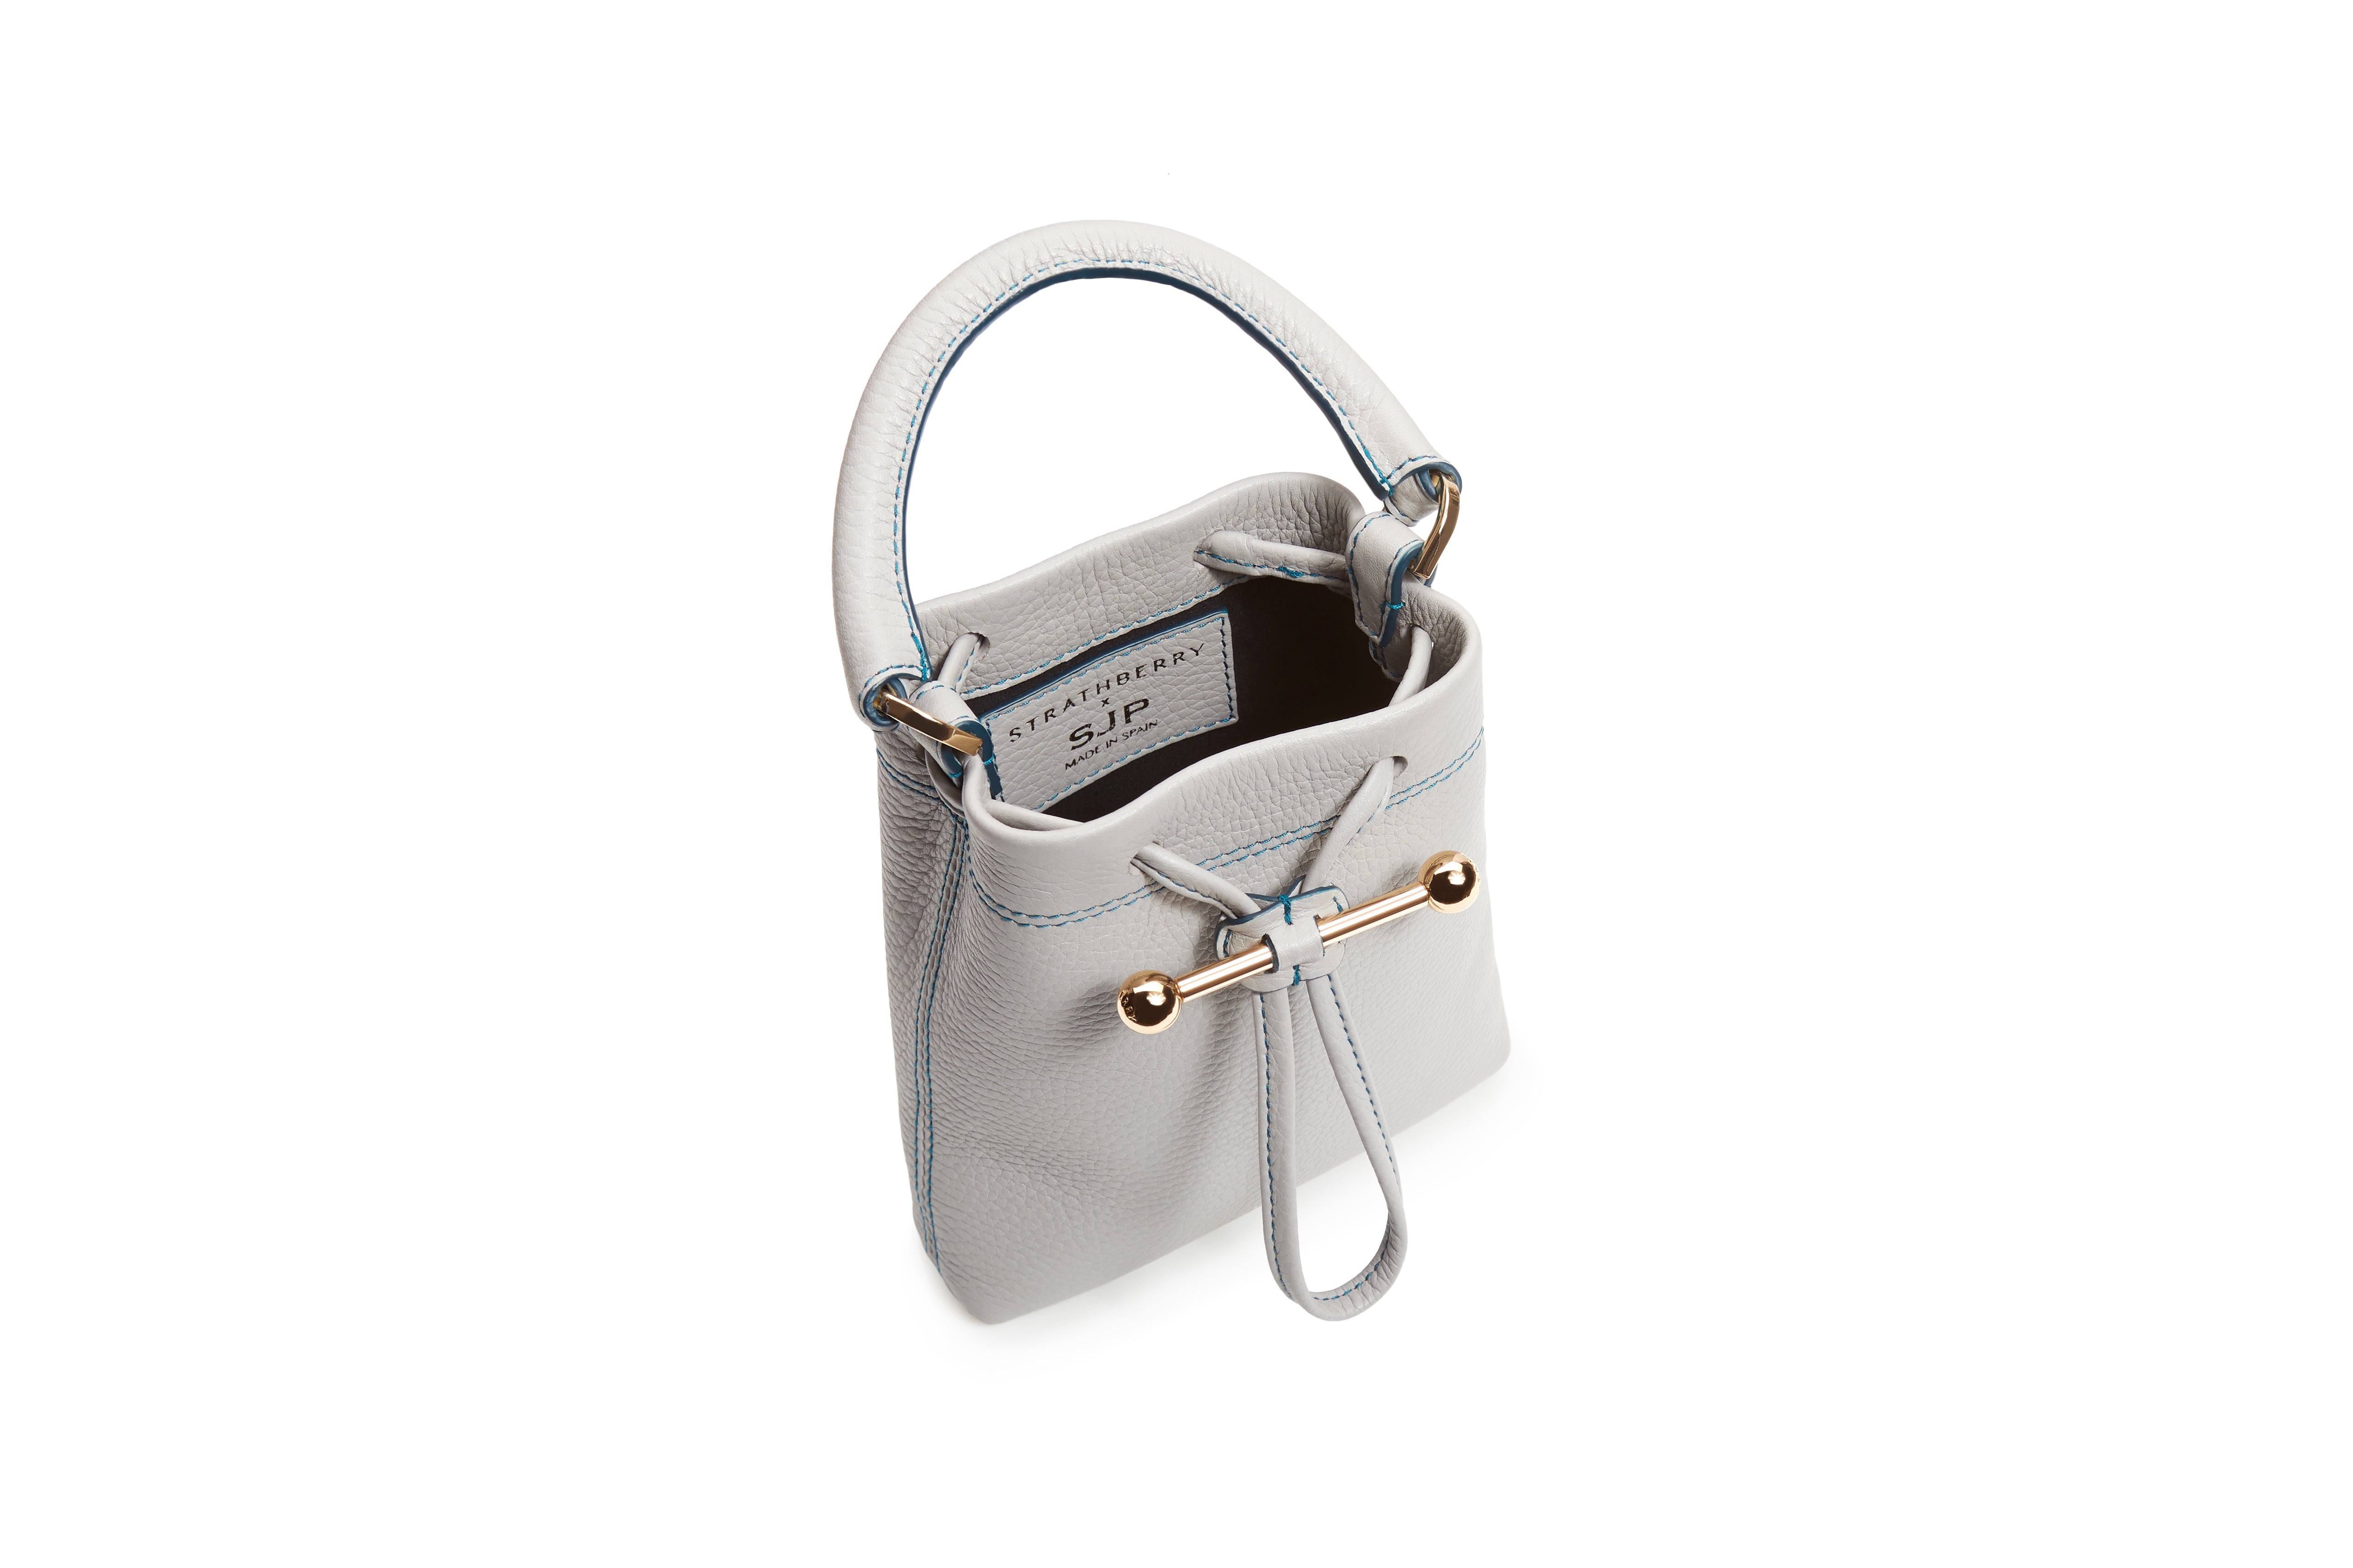 SJP by Sarah Jessica Parker Women's Leather City Osette Mini Strathberry Bag Grey